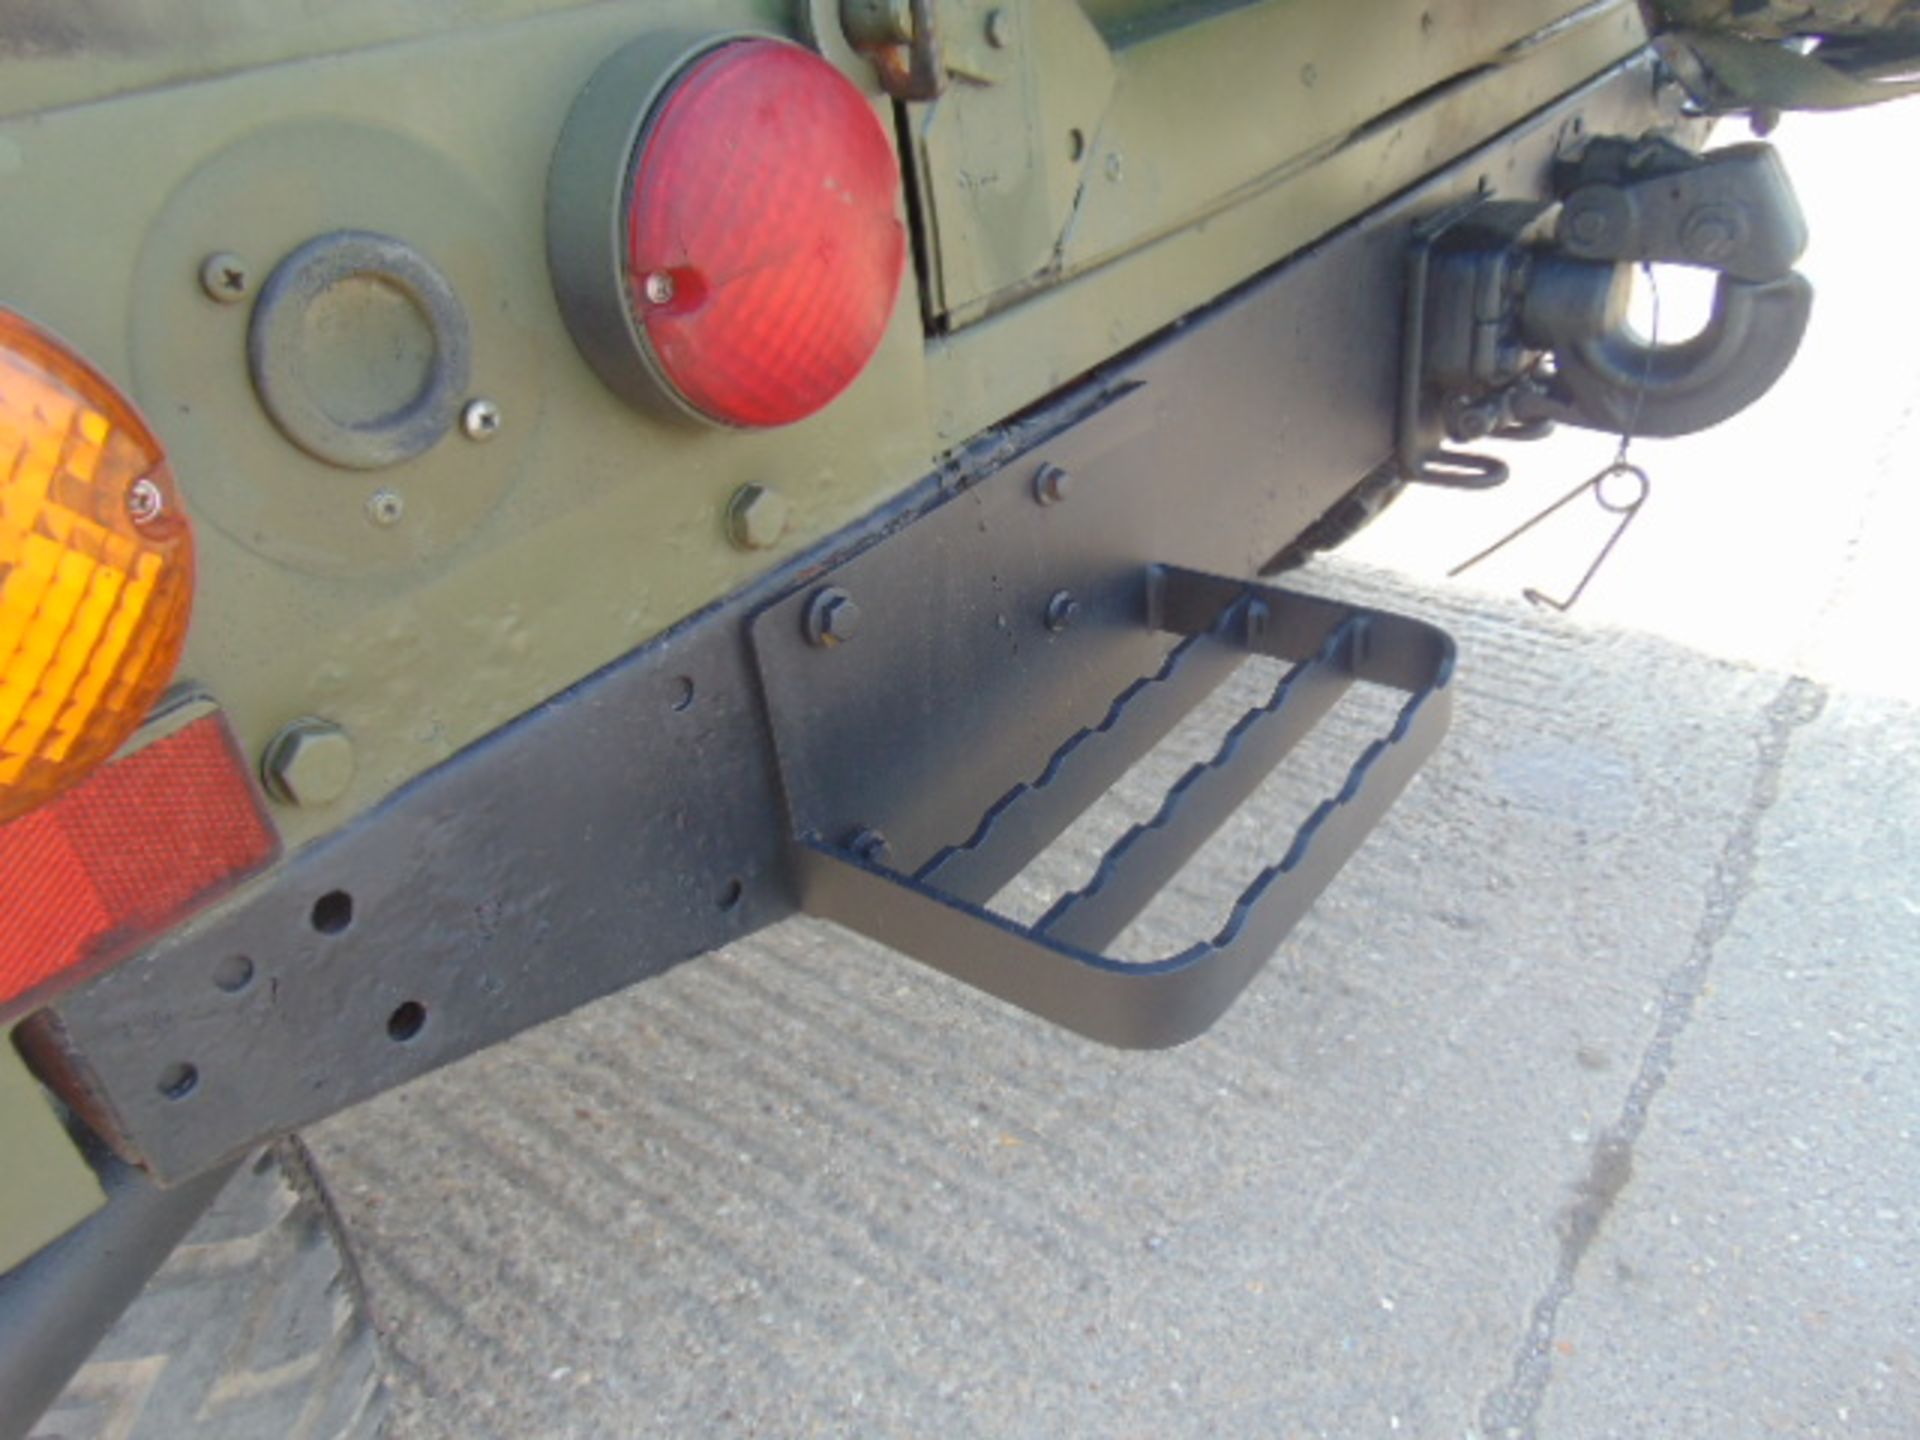 Military Specification Land Rover Wolf 90 Soft Top - Image 21 of 26